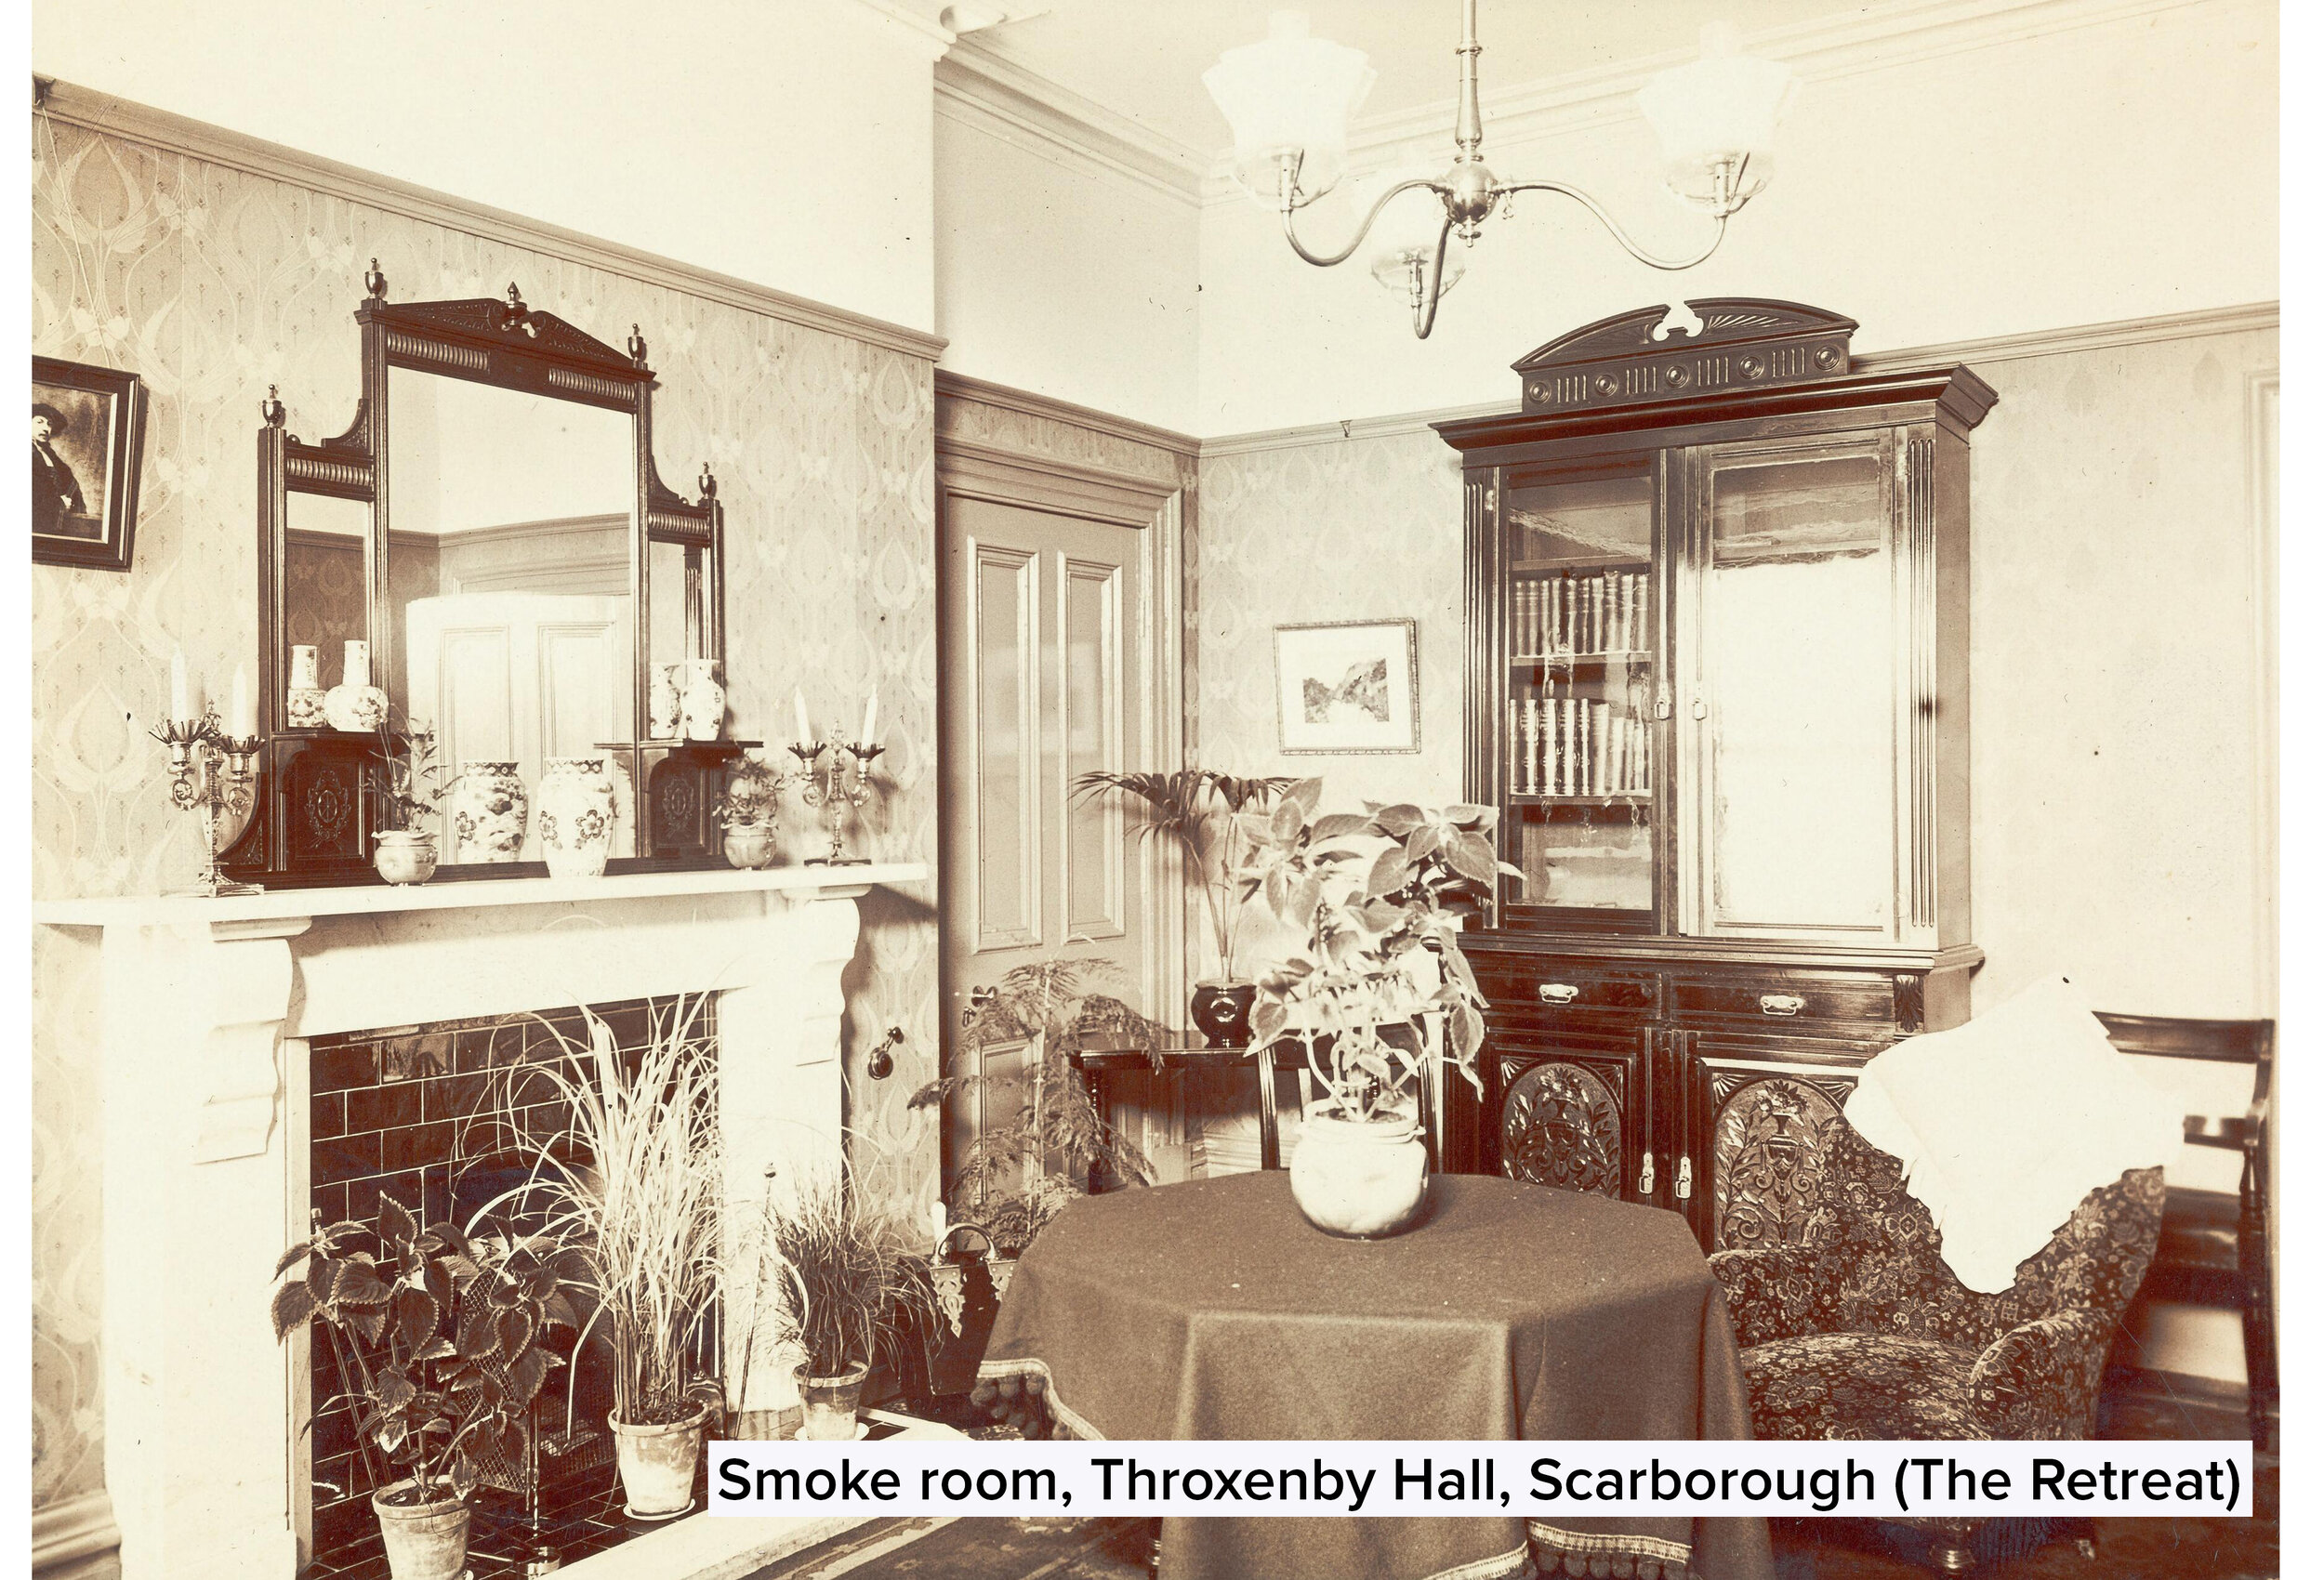 throxenby hall, scarborough, (the retreat) (wellcome collection) - possibly smoke room.jpg